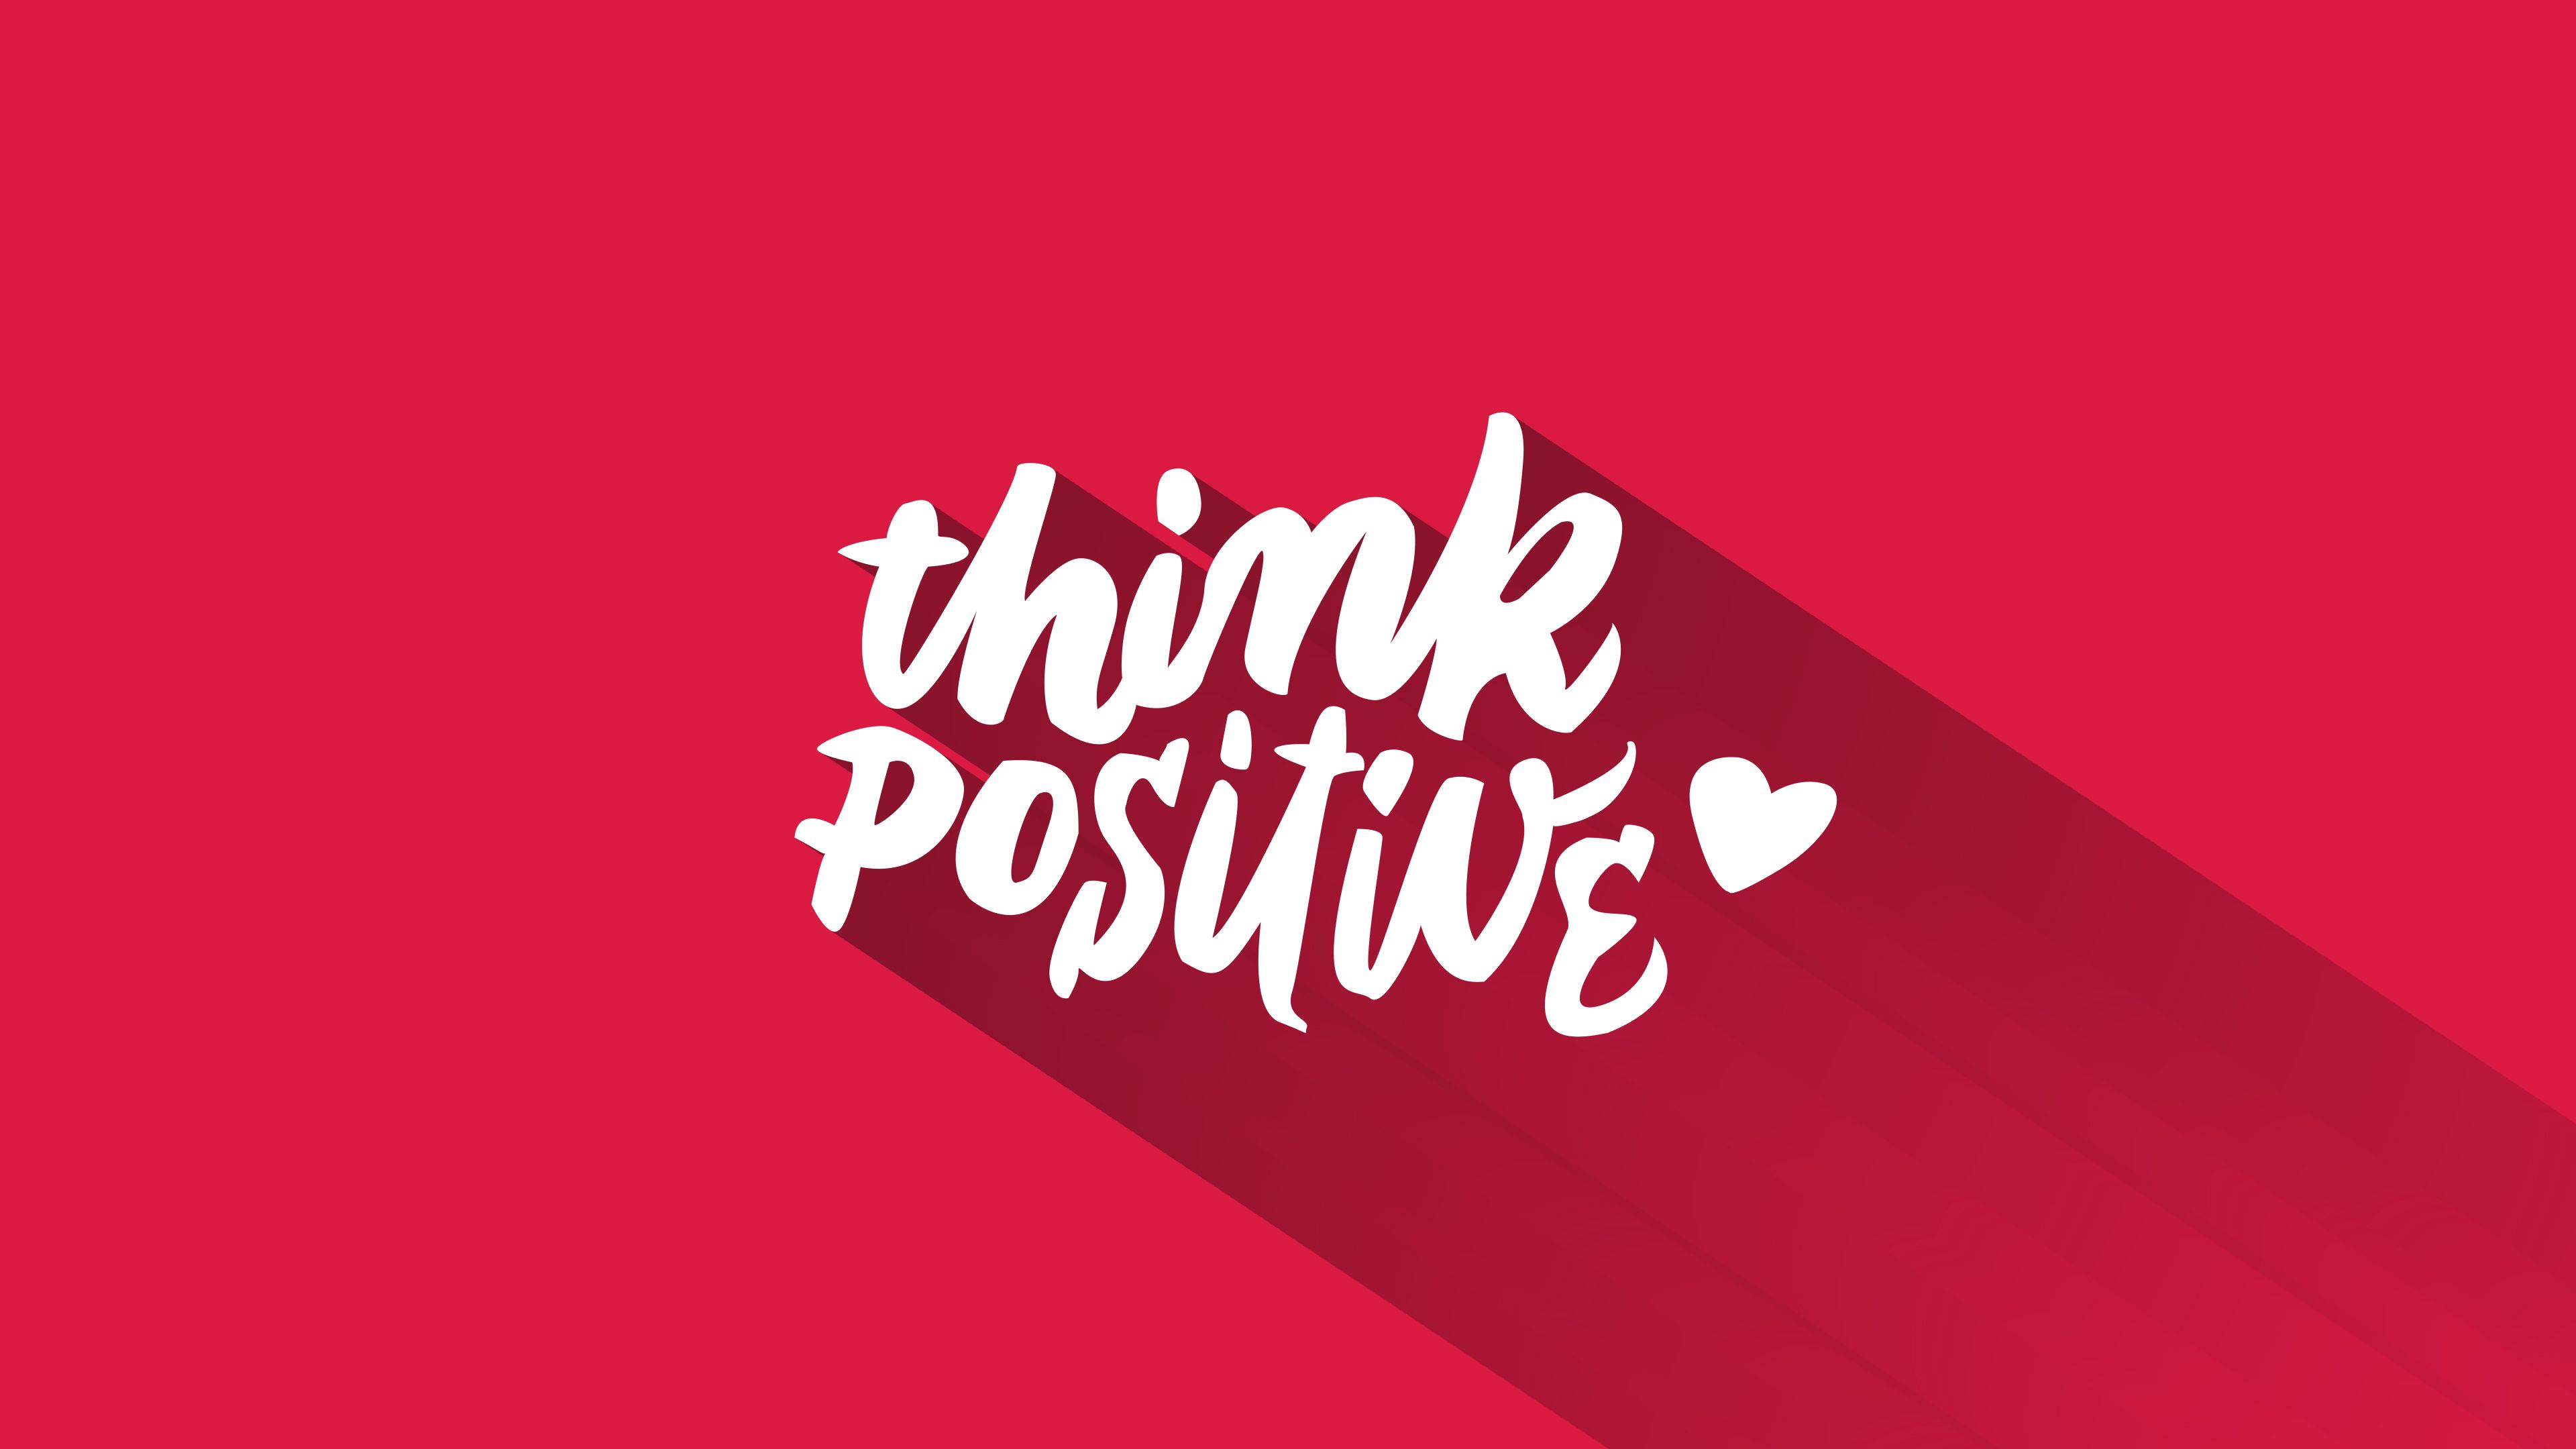 HD wallpaper: think positive download backgrounds for pc | Wallpaper Flare